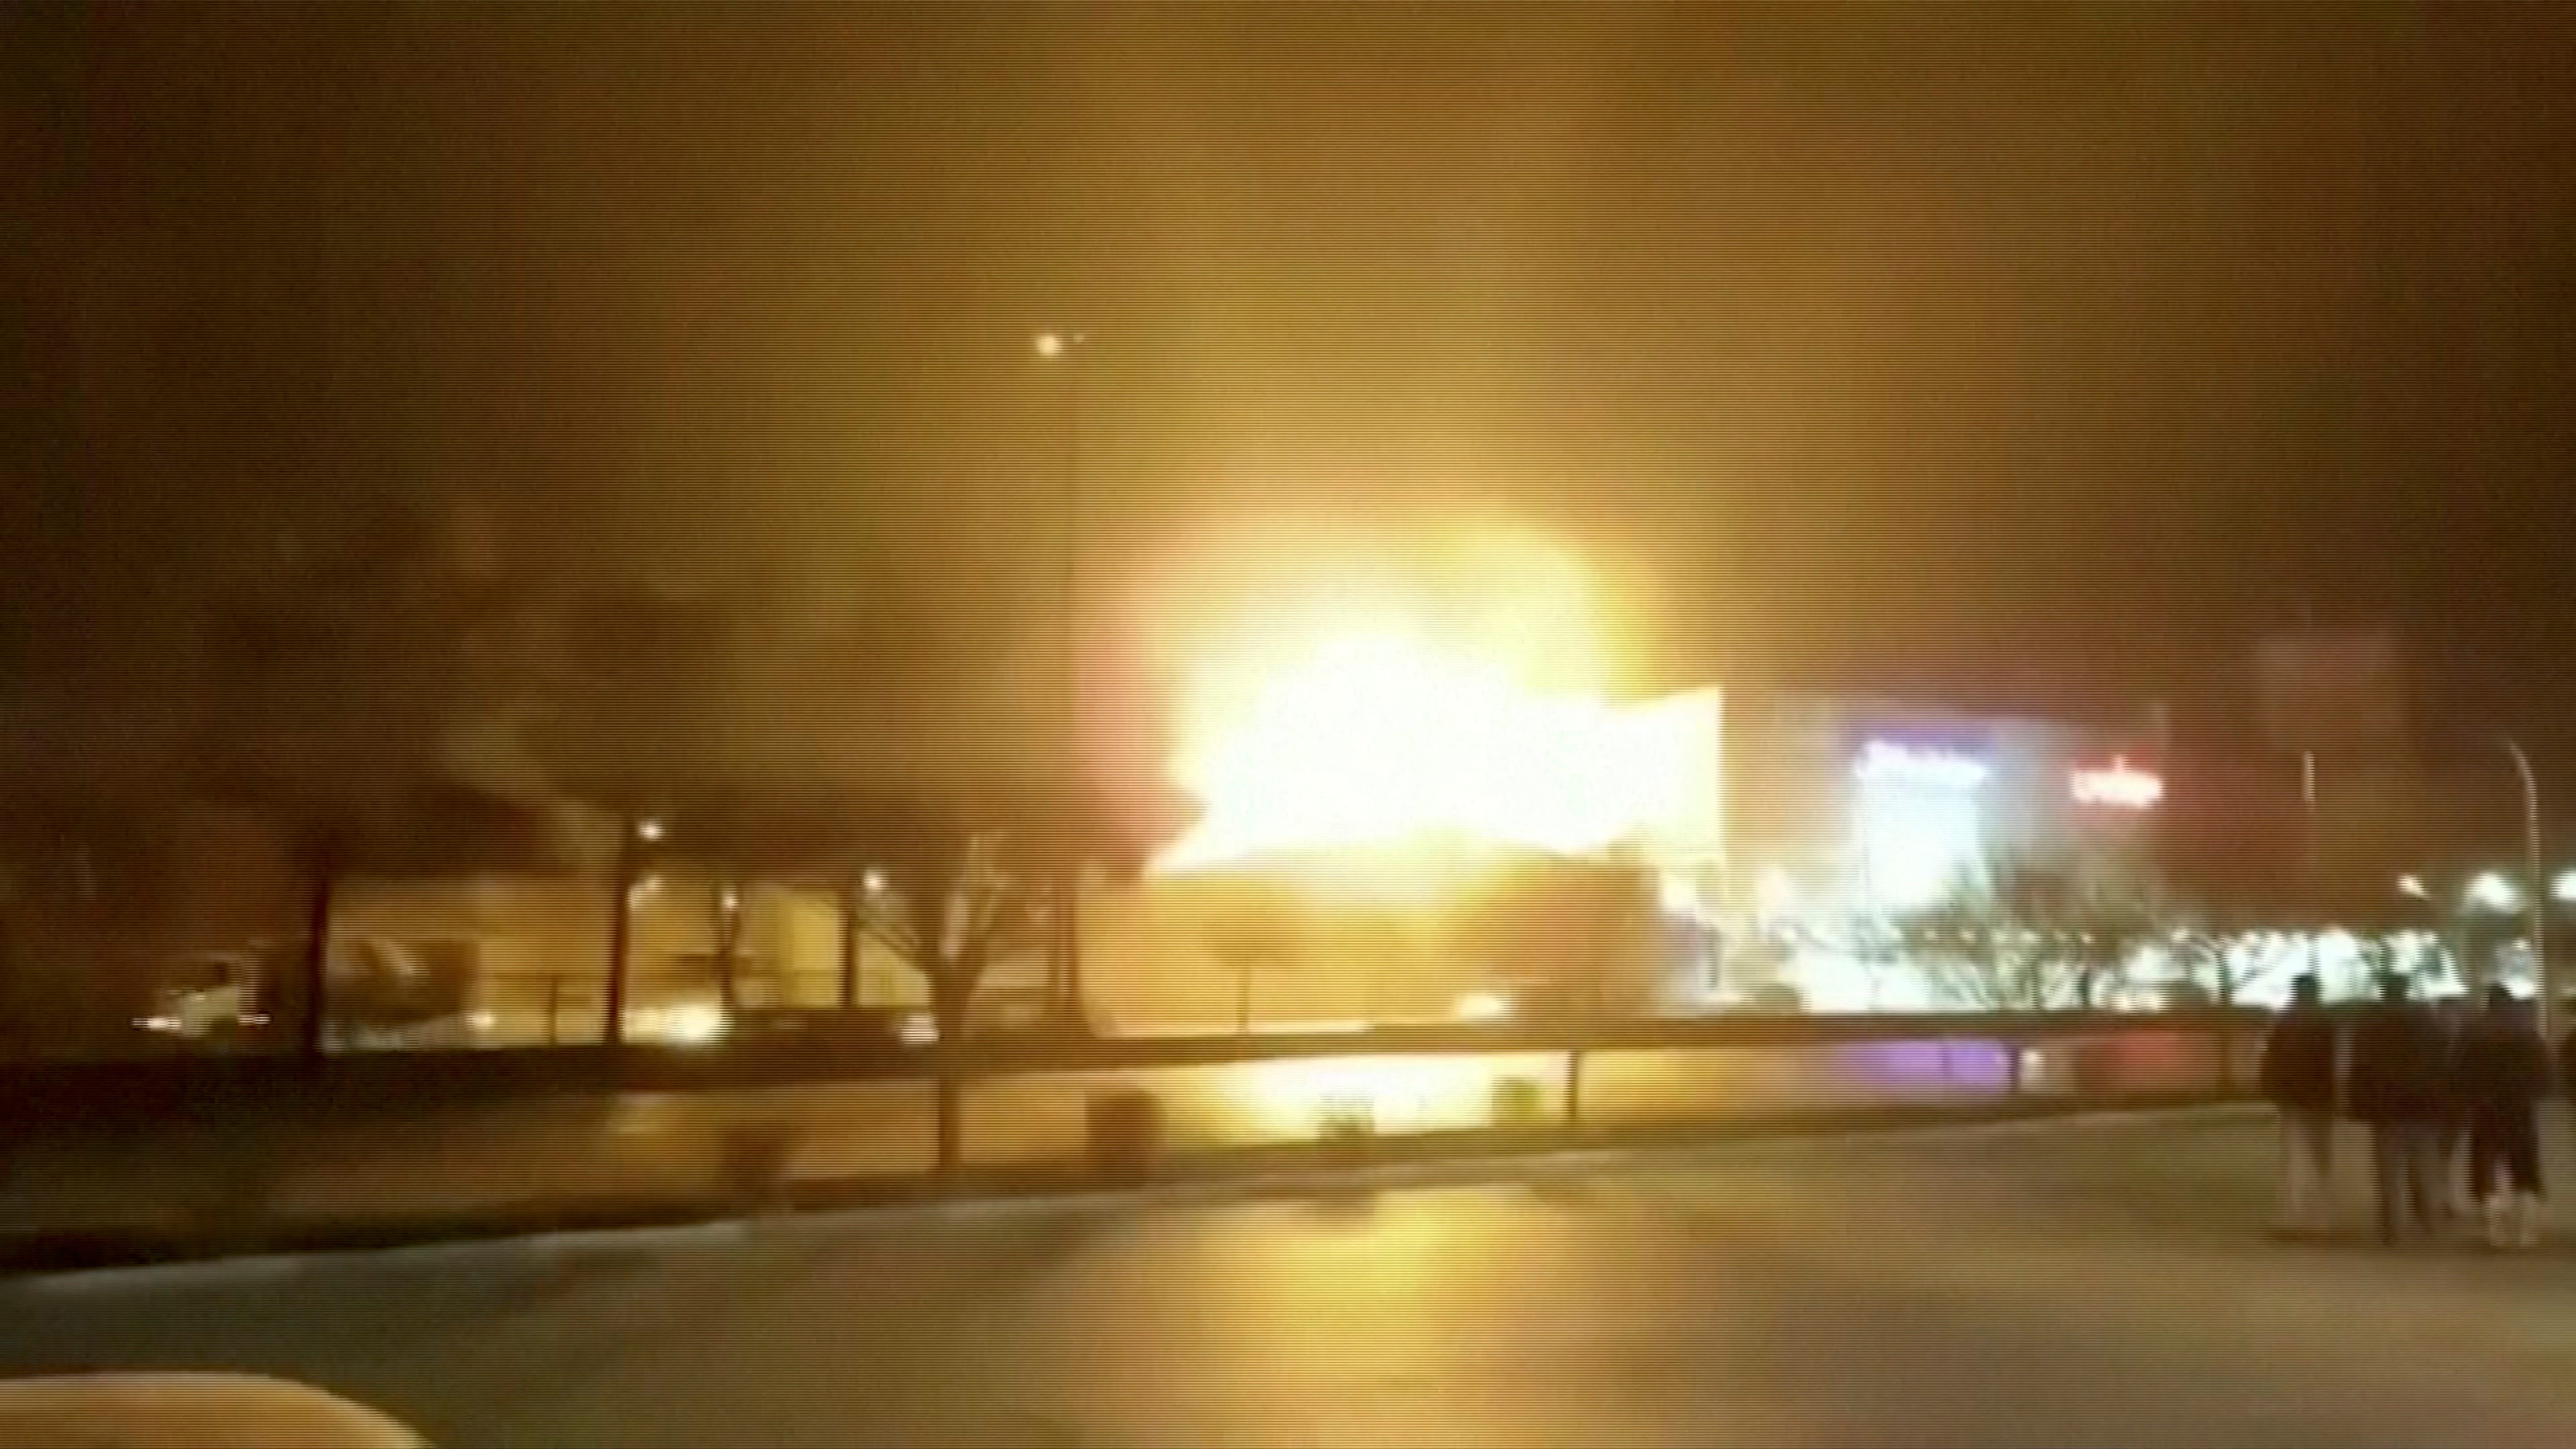 Eyewitness footage is said to show the moment of the explosion at a military-industry factory in Isfahan